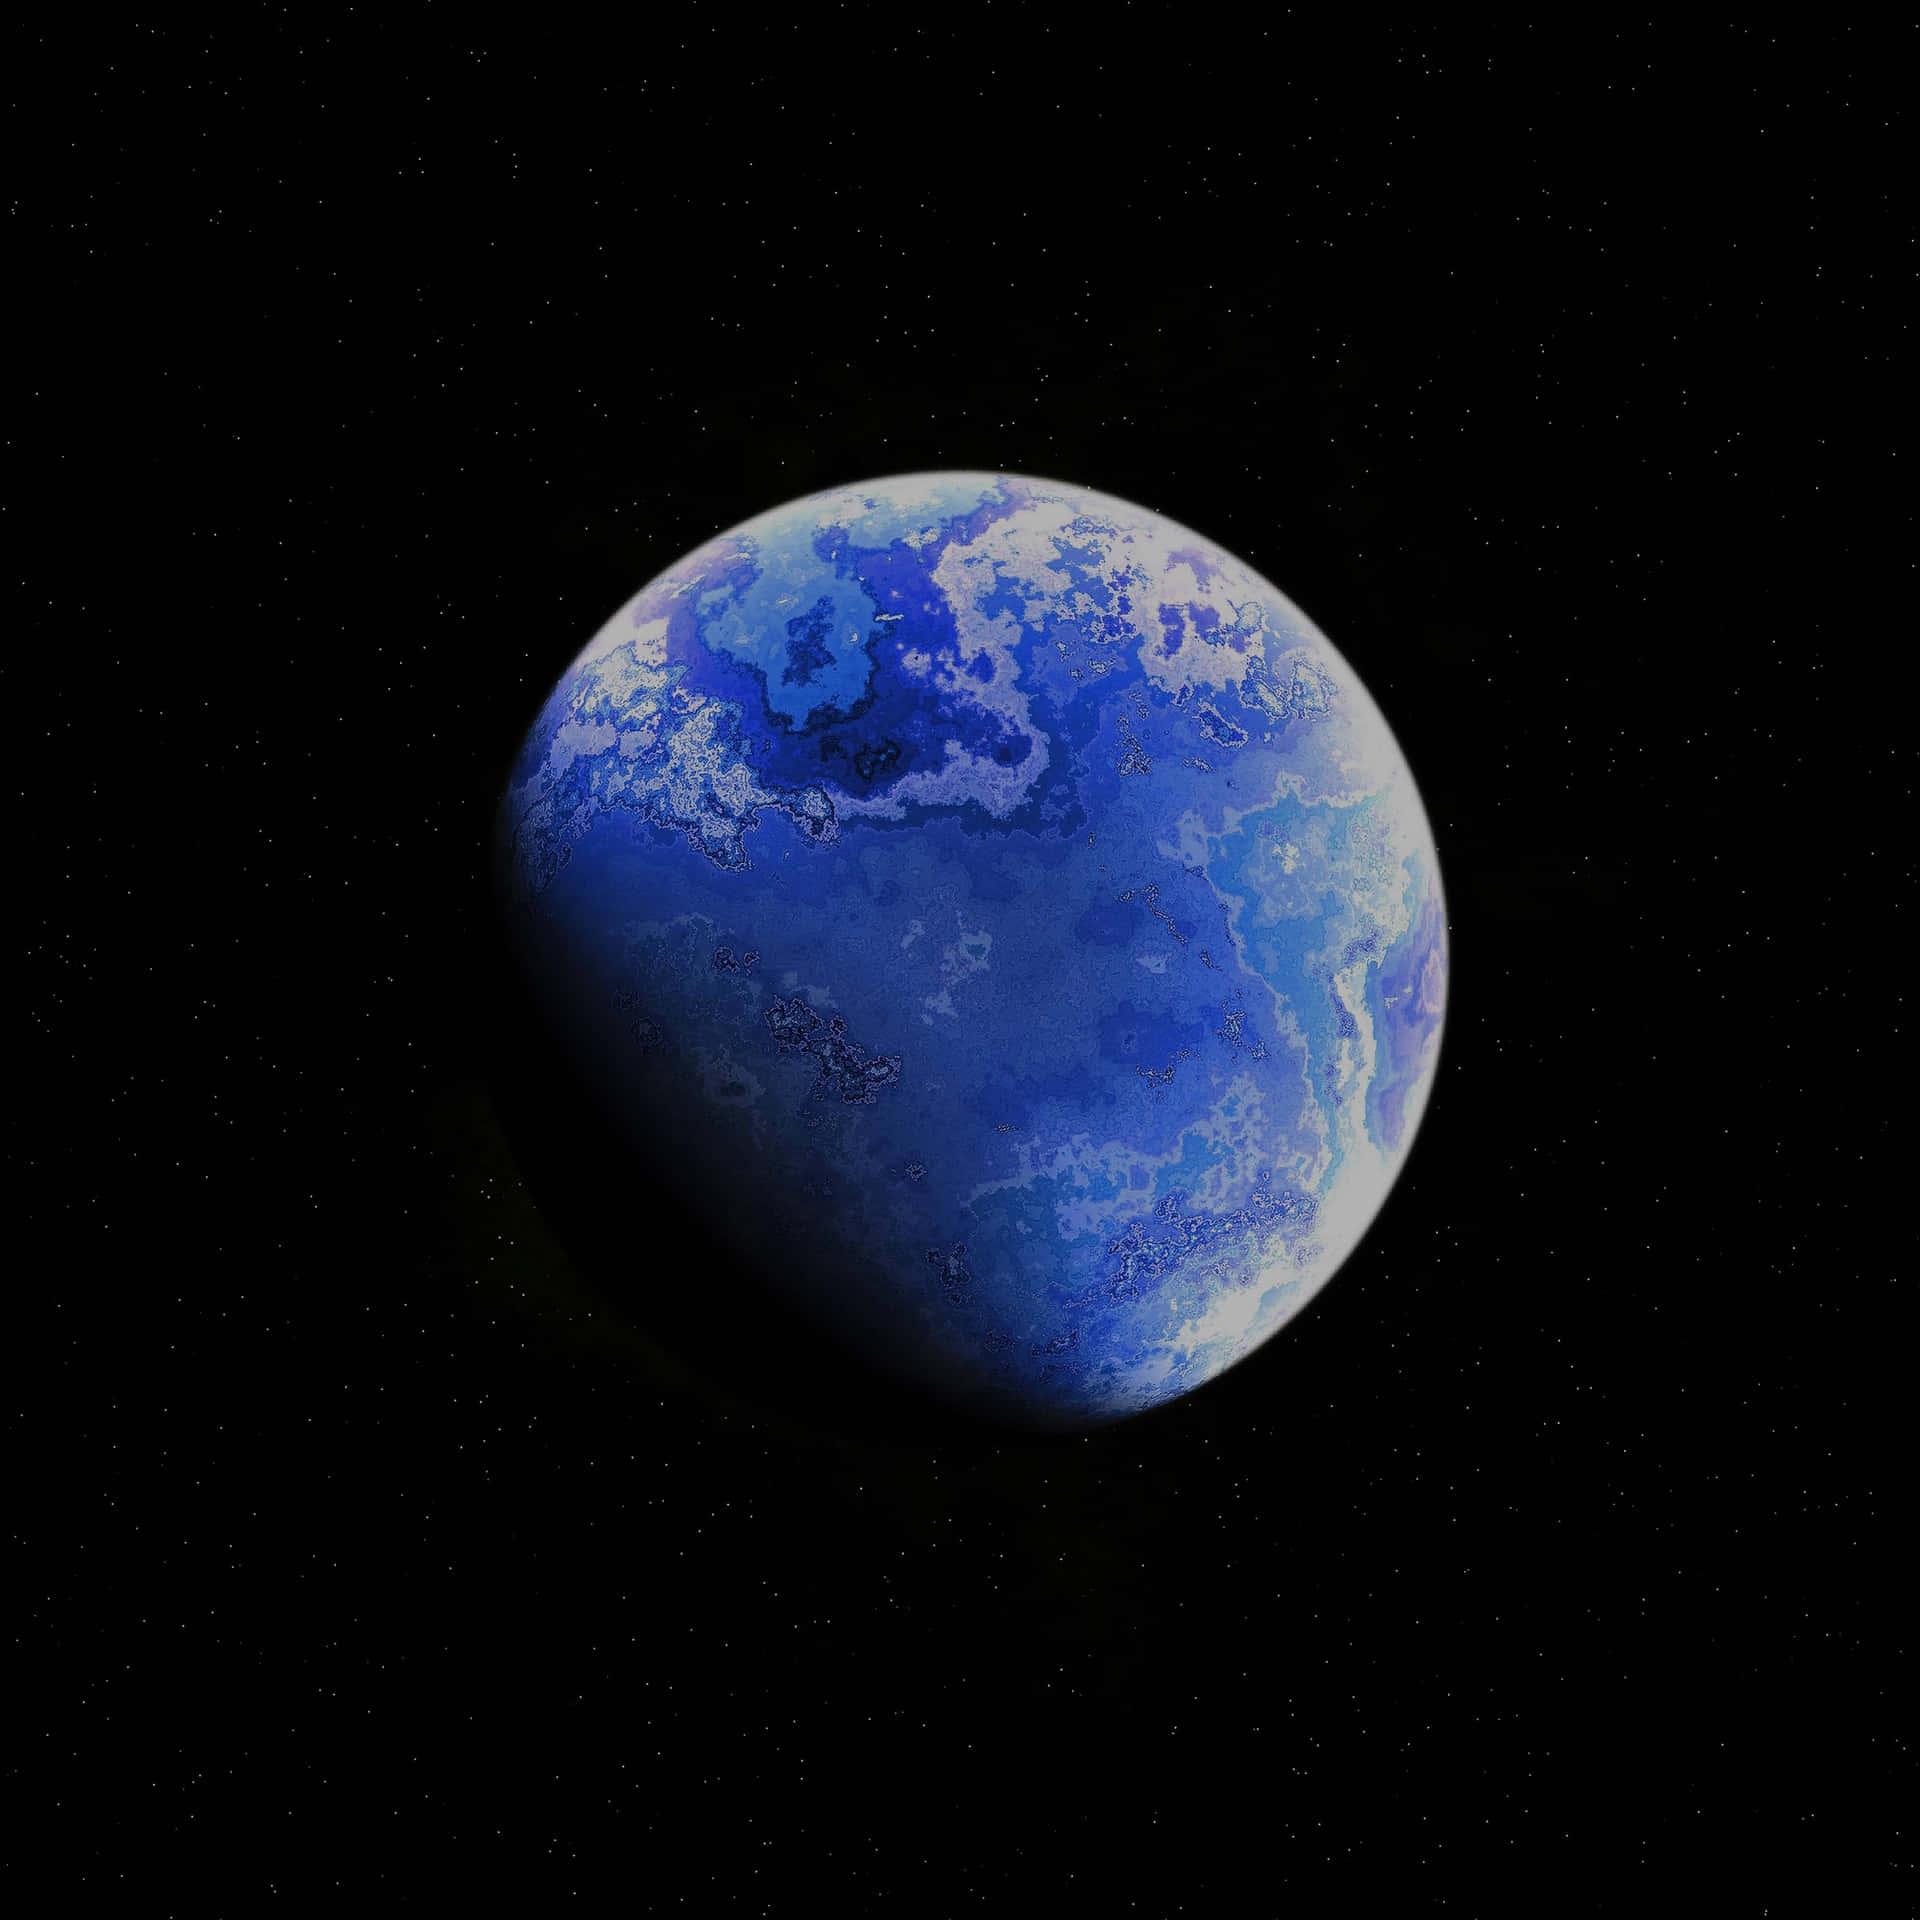 "Our Blue Planet, Home of Endless Beauty" Wallpaper